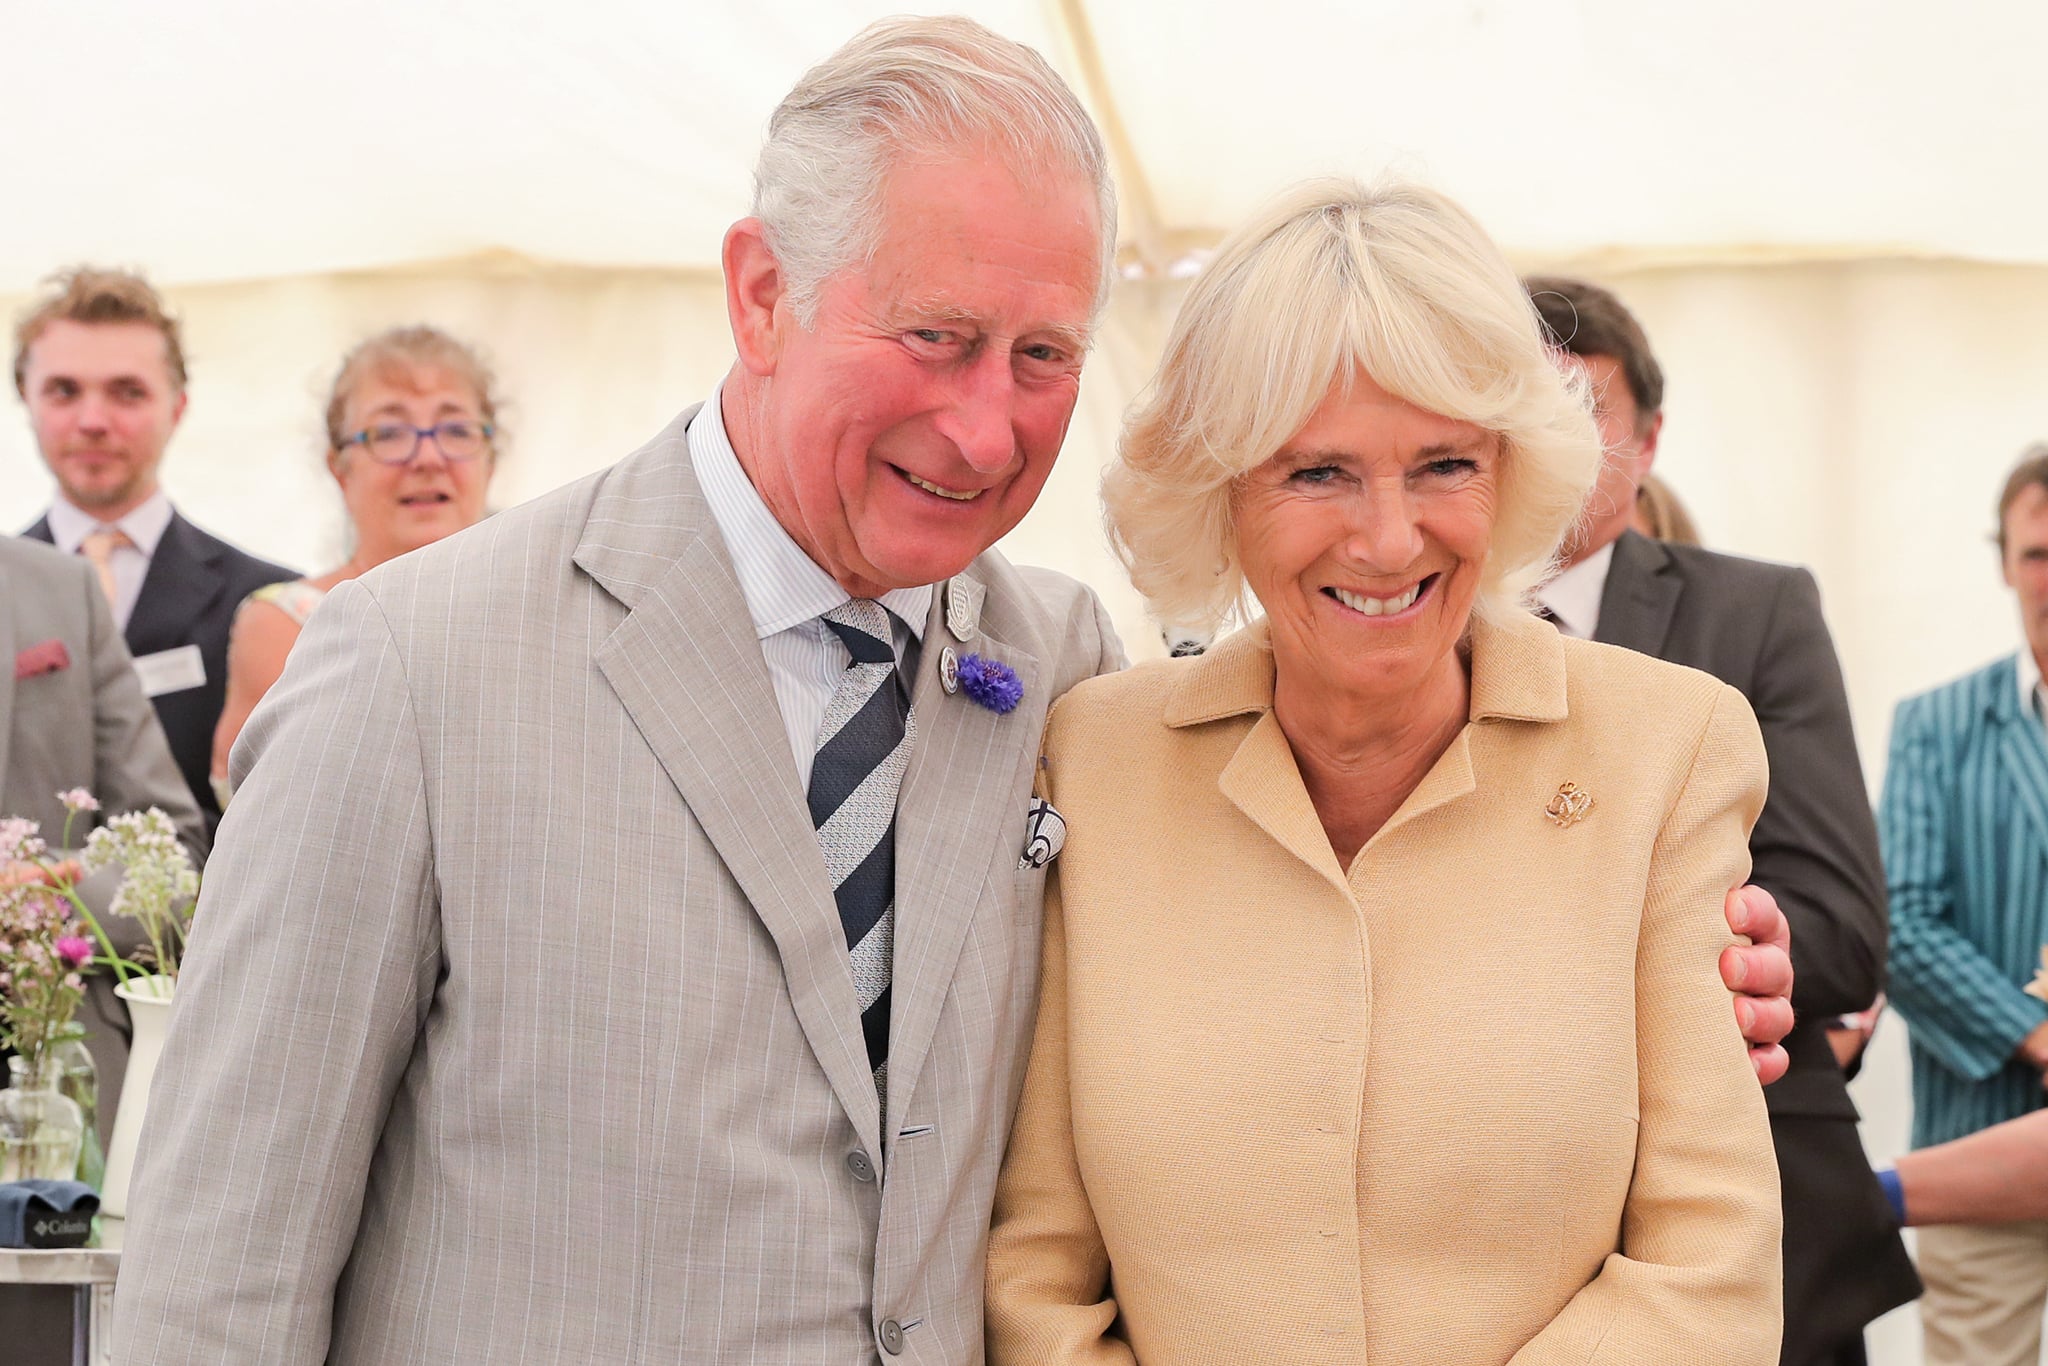 SIMONSBATH, ENGLAND - JULY 17: Camilla, Duchess of Cornwall is sung Happy Birthday by Prince Charles, Prince of Wales and the crowds gathered at the National Parks 'Big Picnic' celebration in honour of all 15 of the UK's National Parks, during an official visit to Devon & Cornwall on July 17, 2019 in Simonsbath, England. Held in Exmoor National Park the picnic marks 70 years since they were created by the 1949 National Parks and Access to the Countryside Act. (Photo by Chris Jackson/Getty Images)